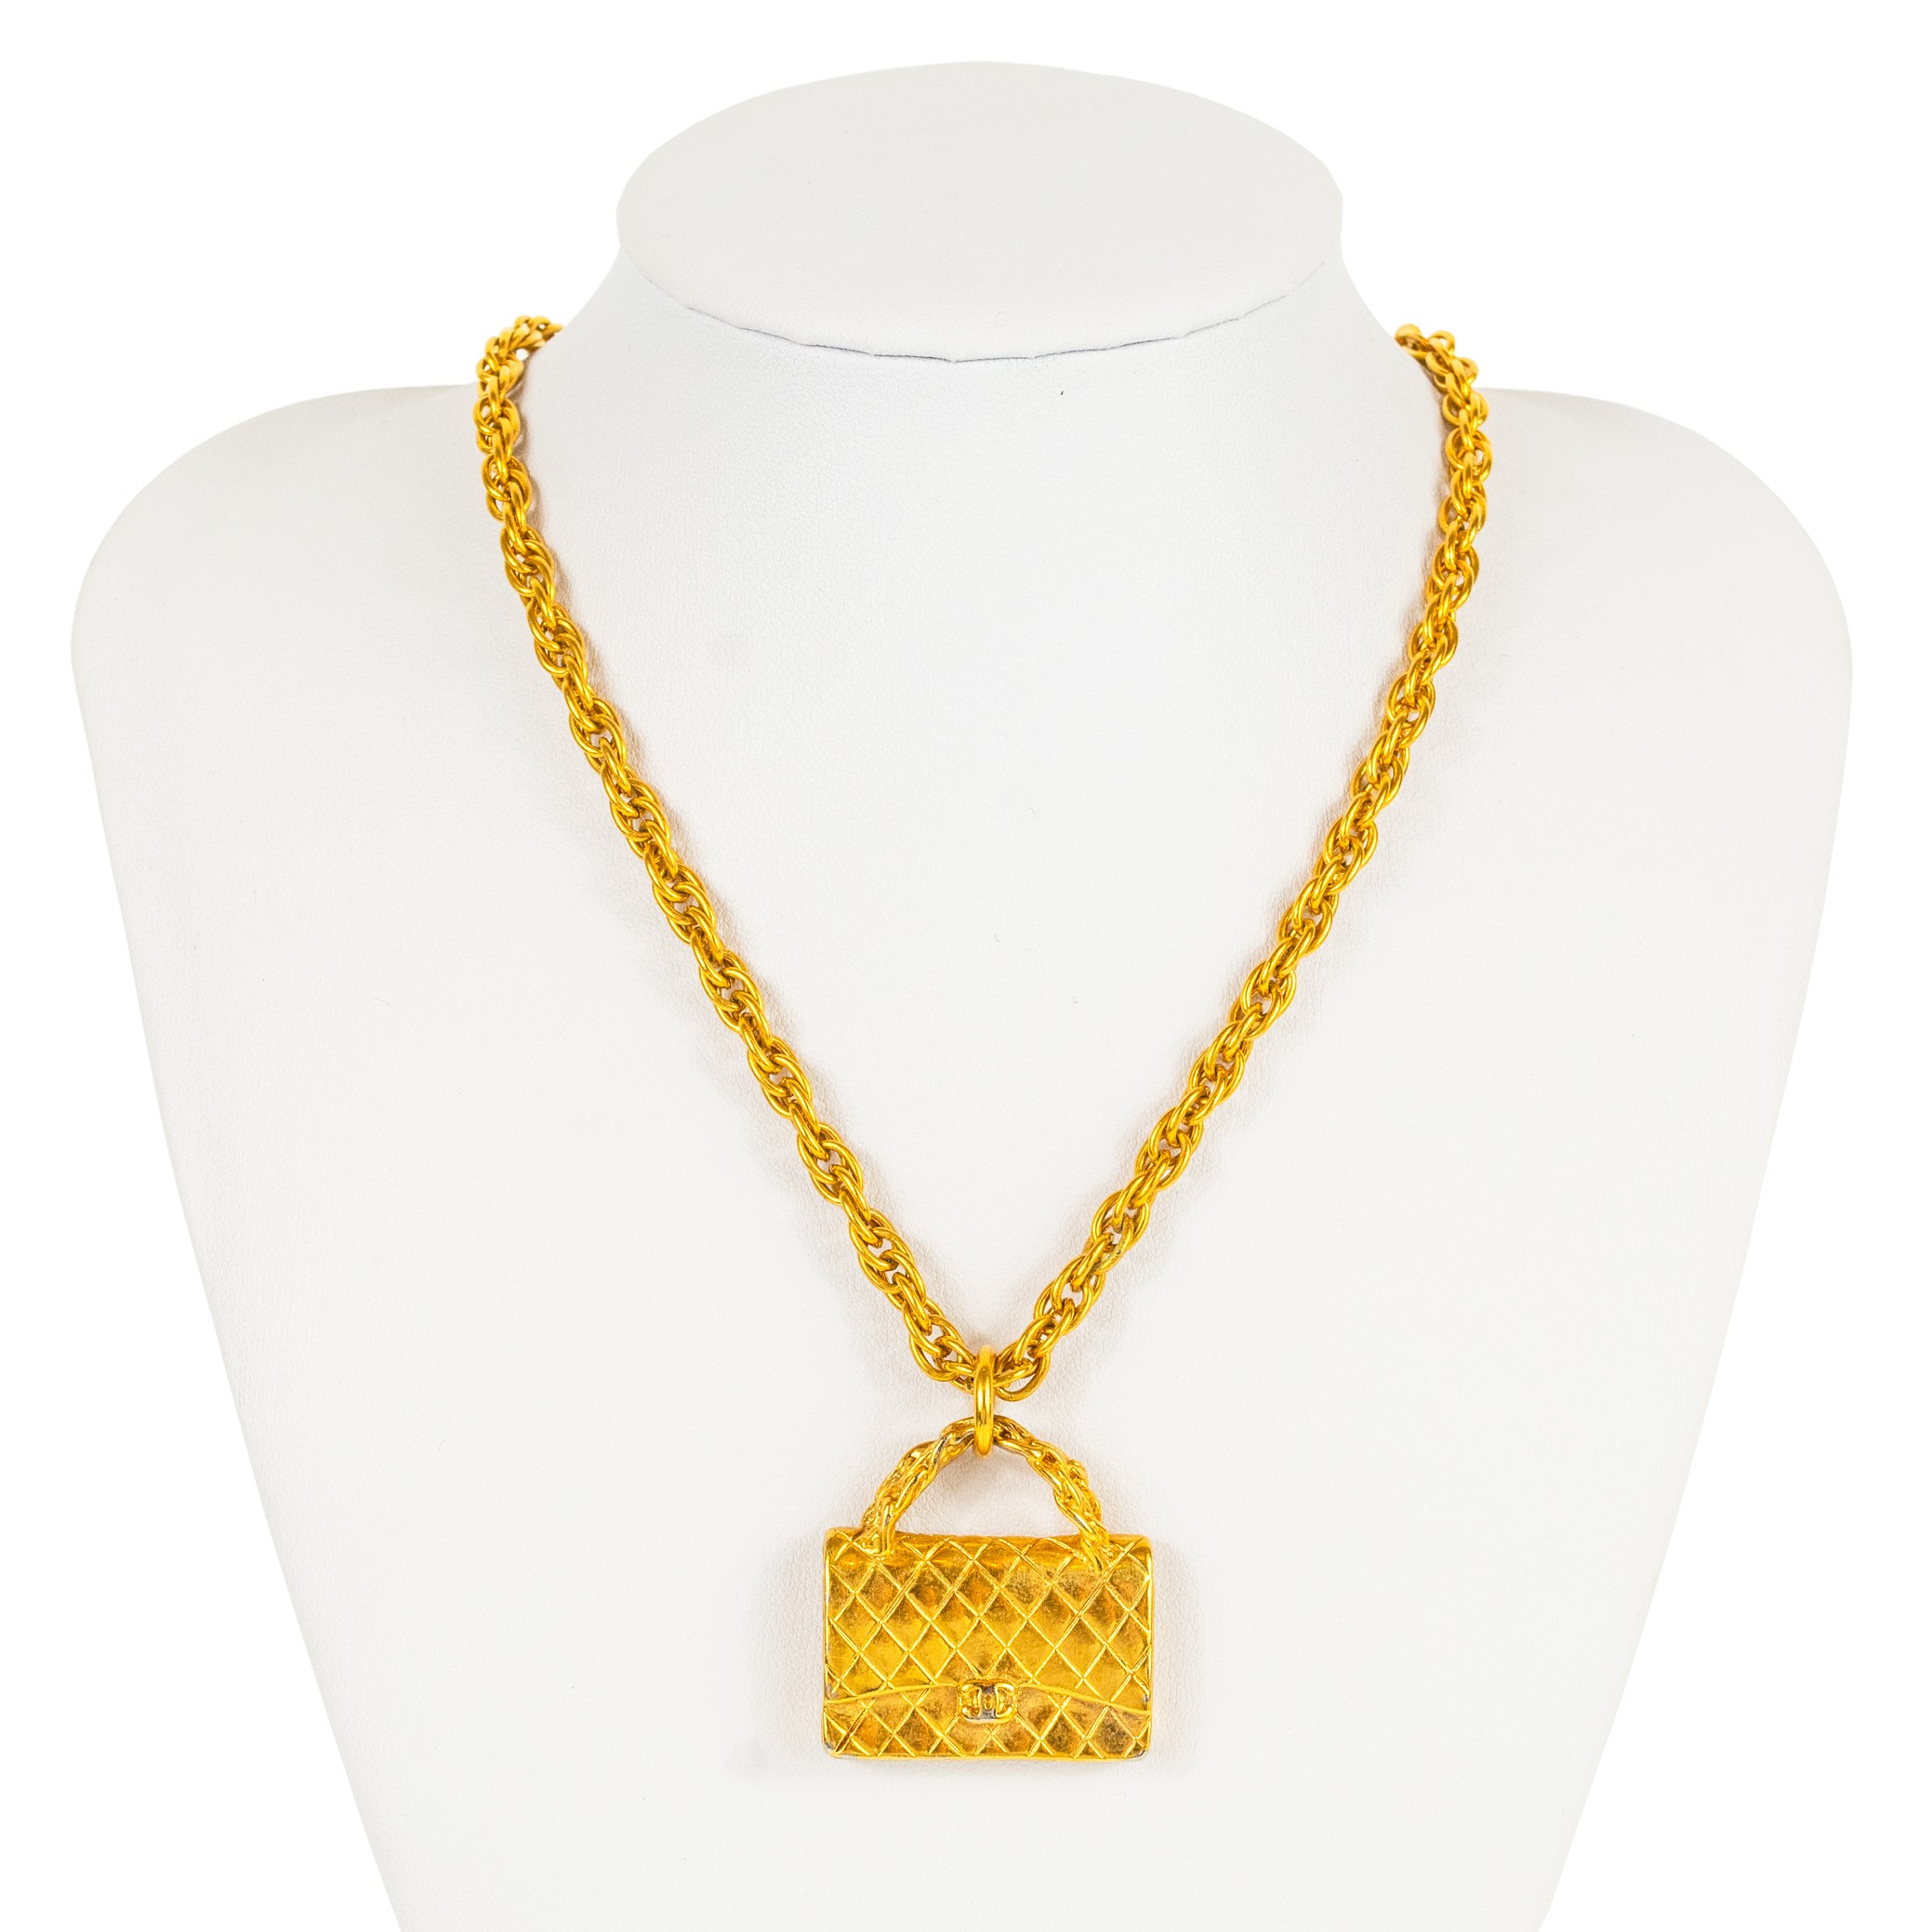 Lot 361 - A Chanel gold tone quilted handbag pendant